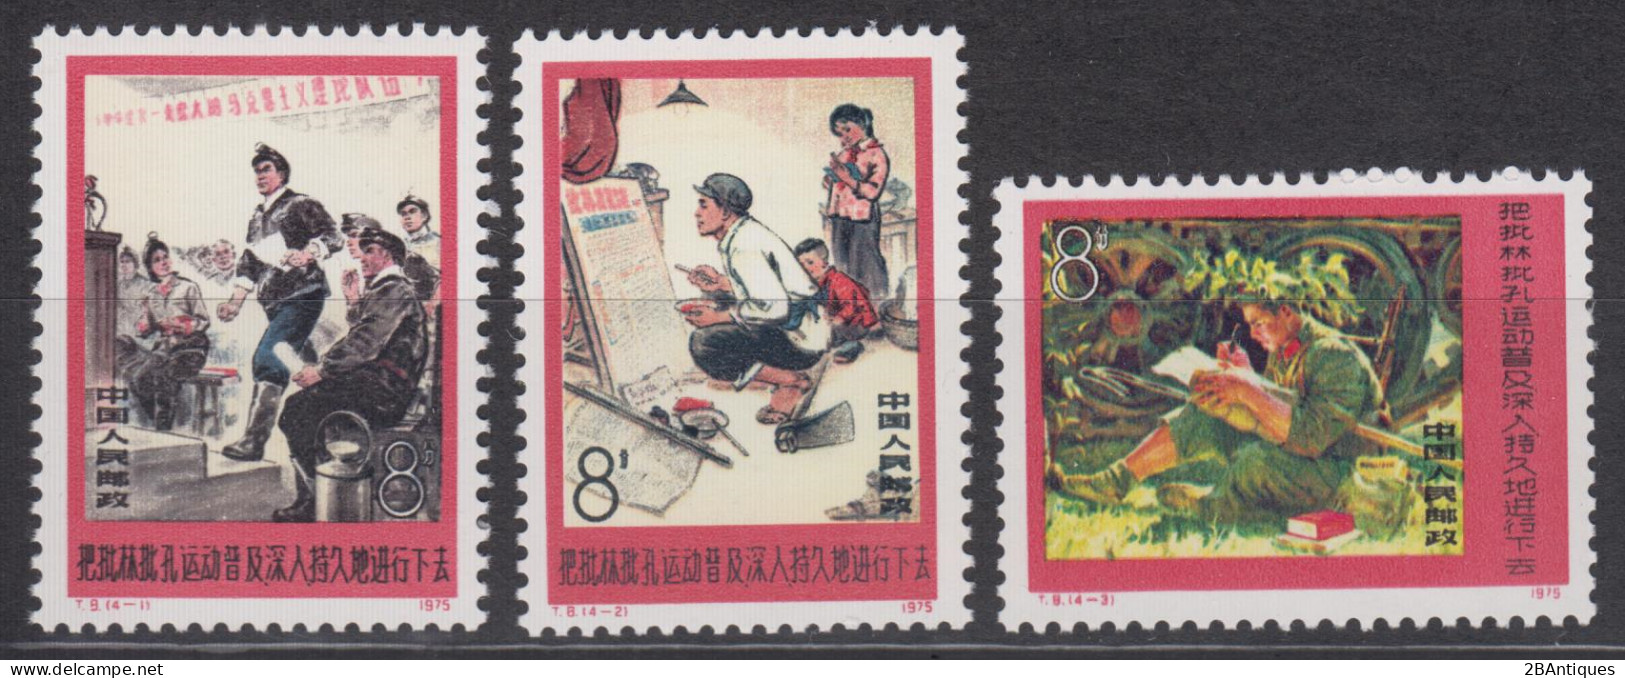 PR CHINA 1975 - Criticism Of Confucius And Liu Piao MNH** OG XF - Unused Stamps